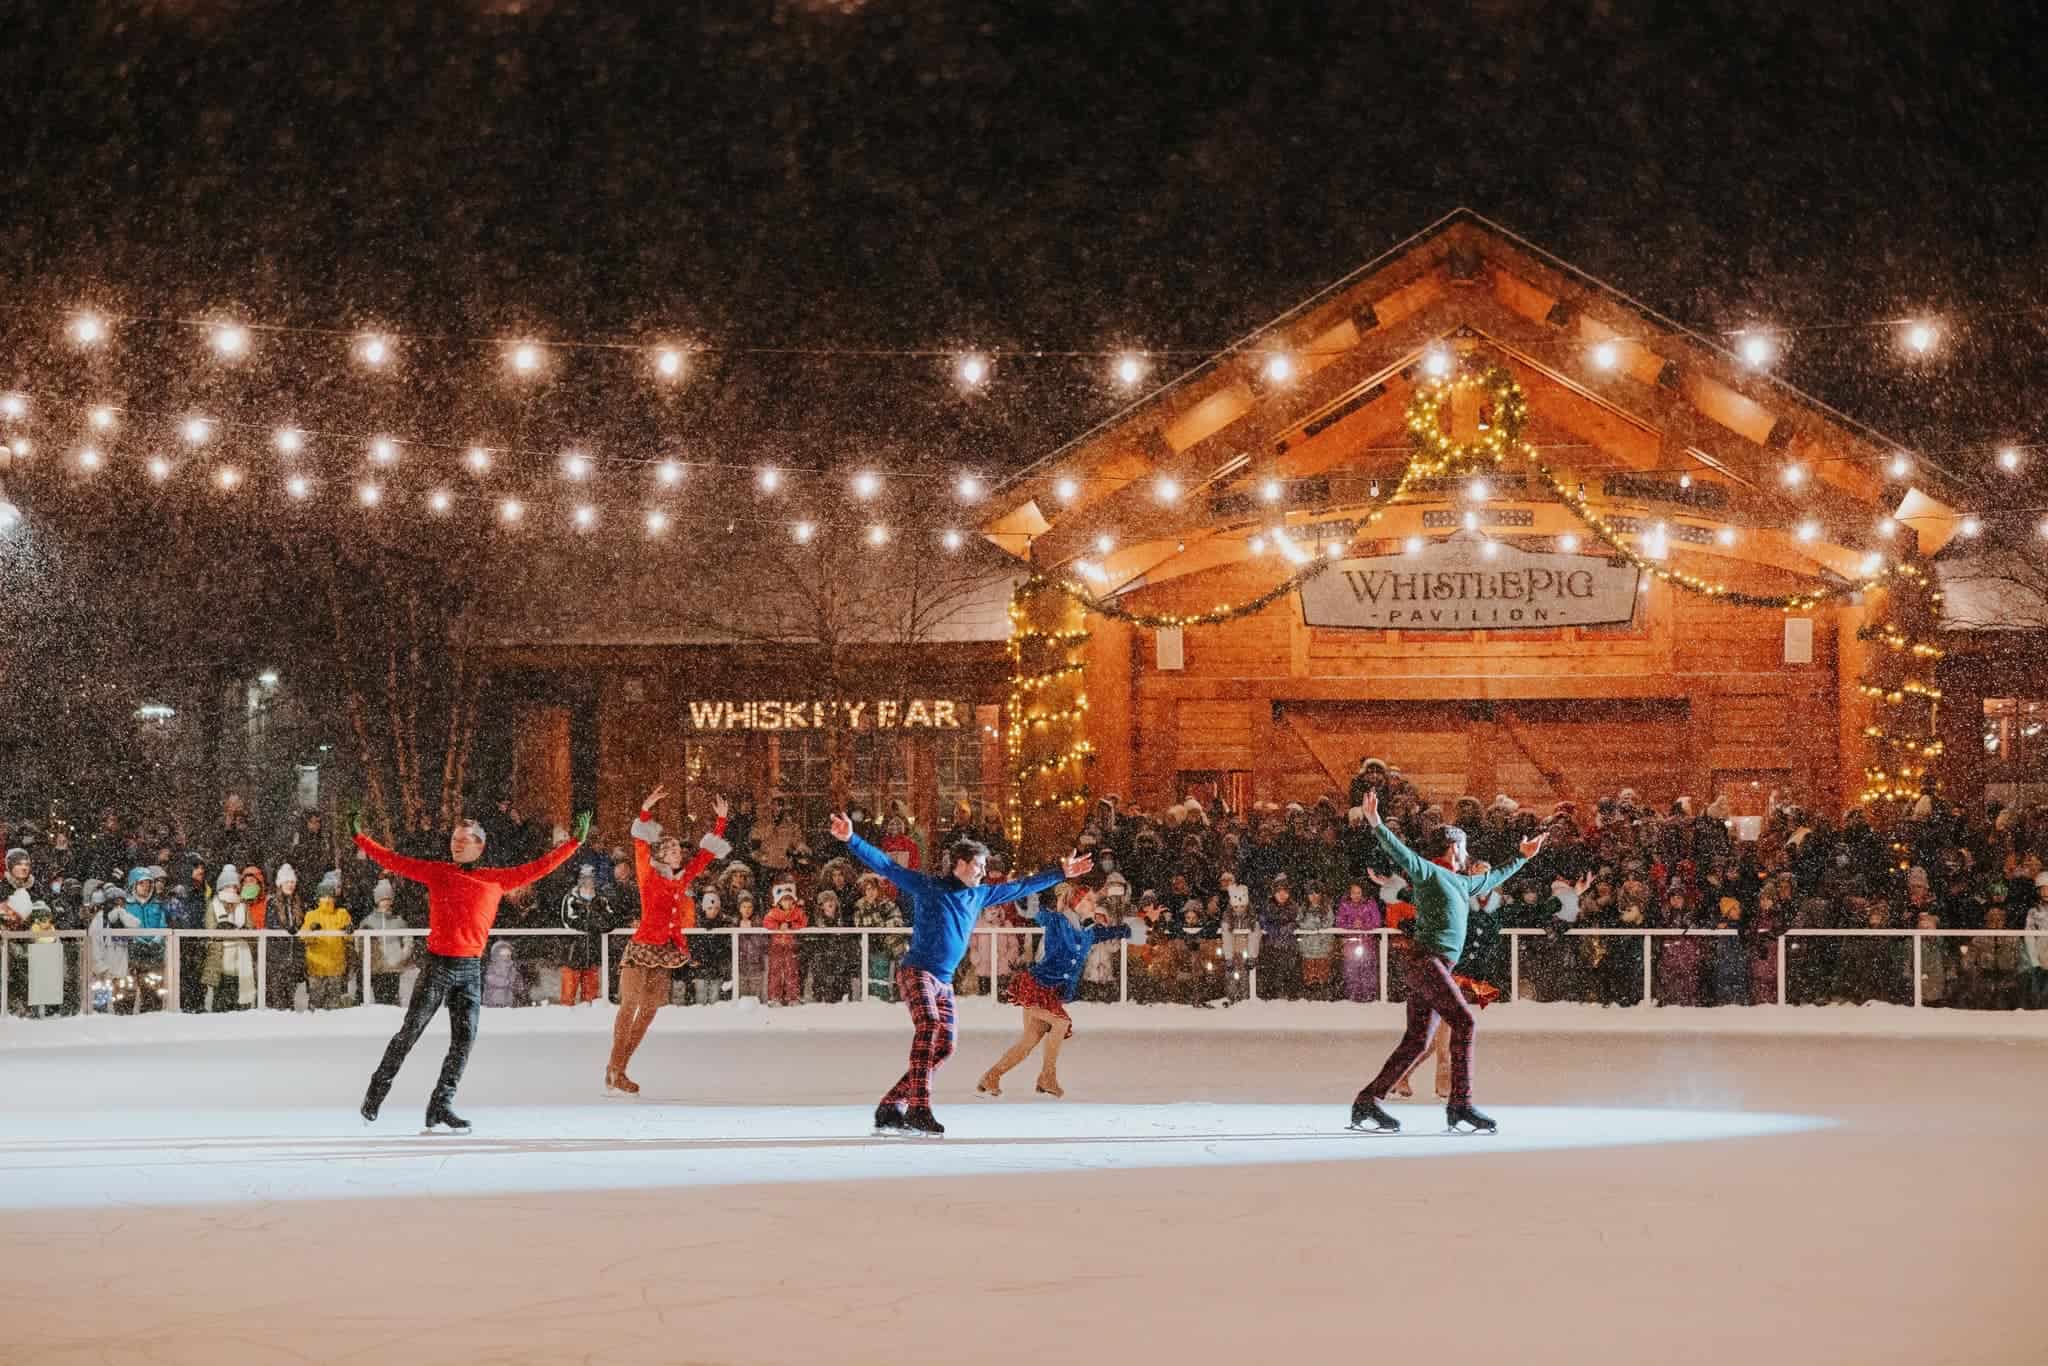 Spruce Peak Performing Arts Center - Ice Skating Show at WhistlePig Pavilion